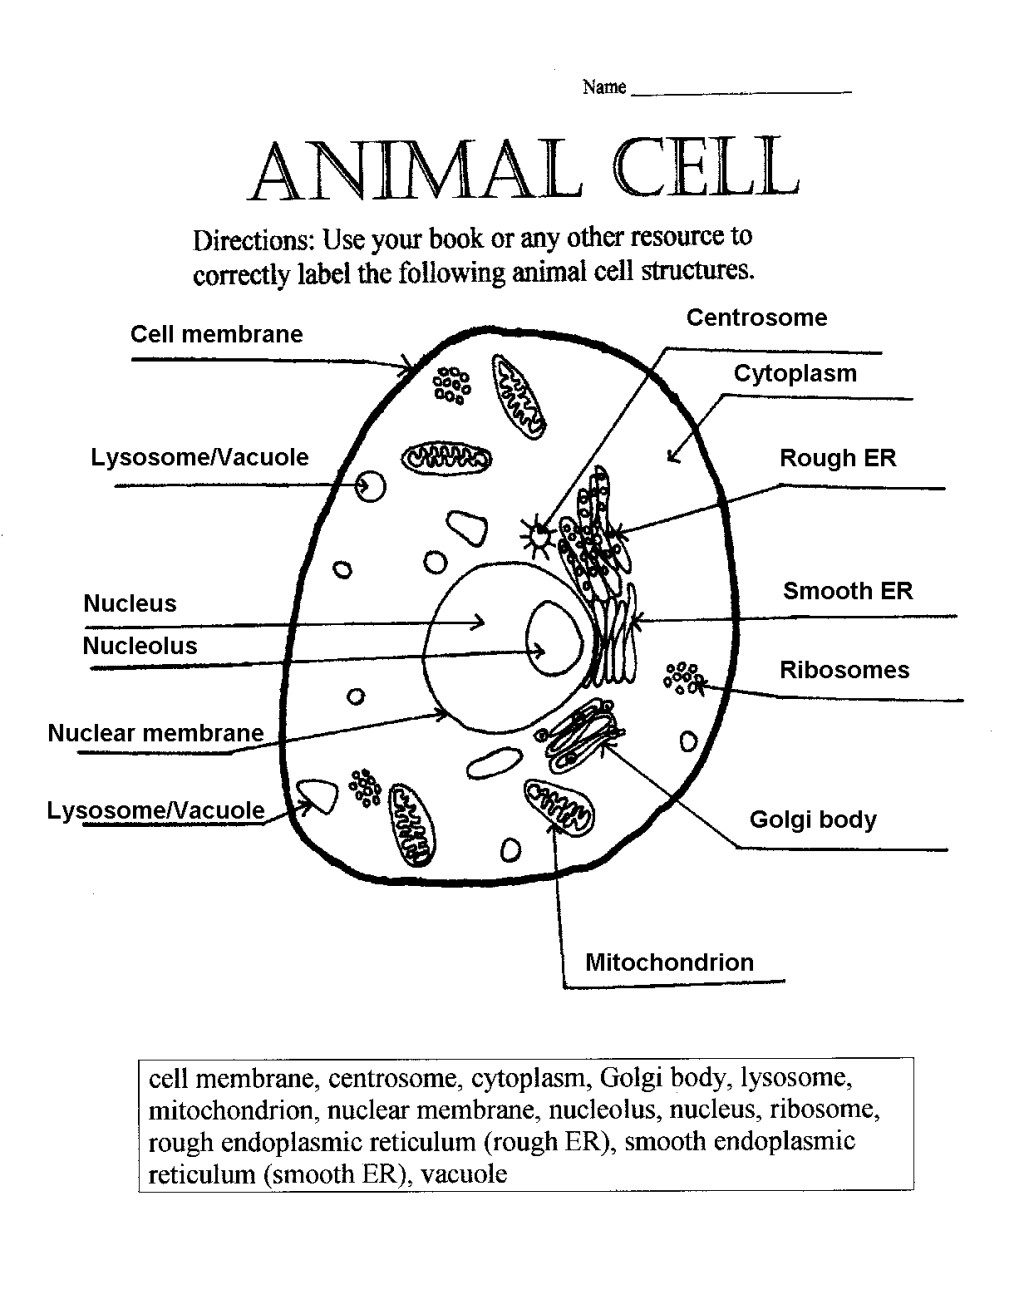 animal-cell-sketch-at-paintingvalley-explore-collection-of-animal-cell-sketch